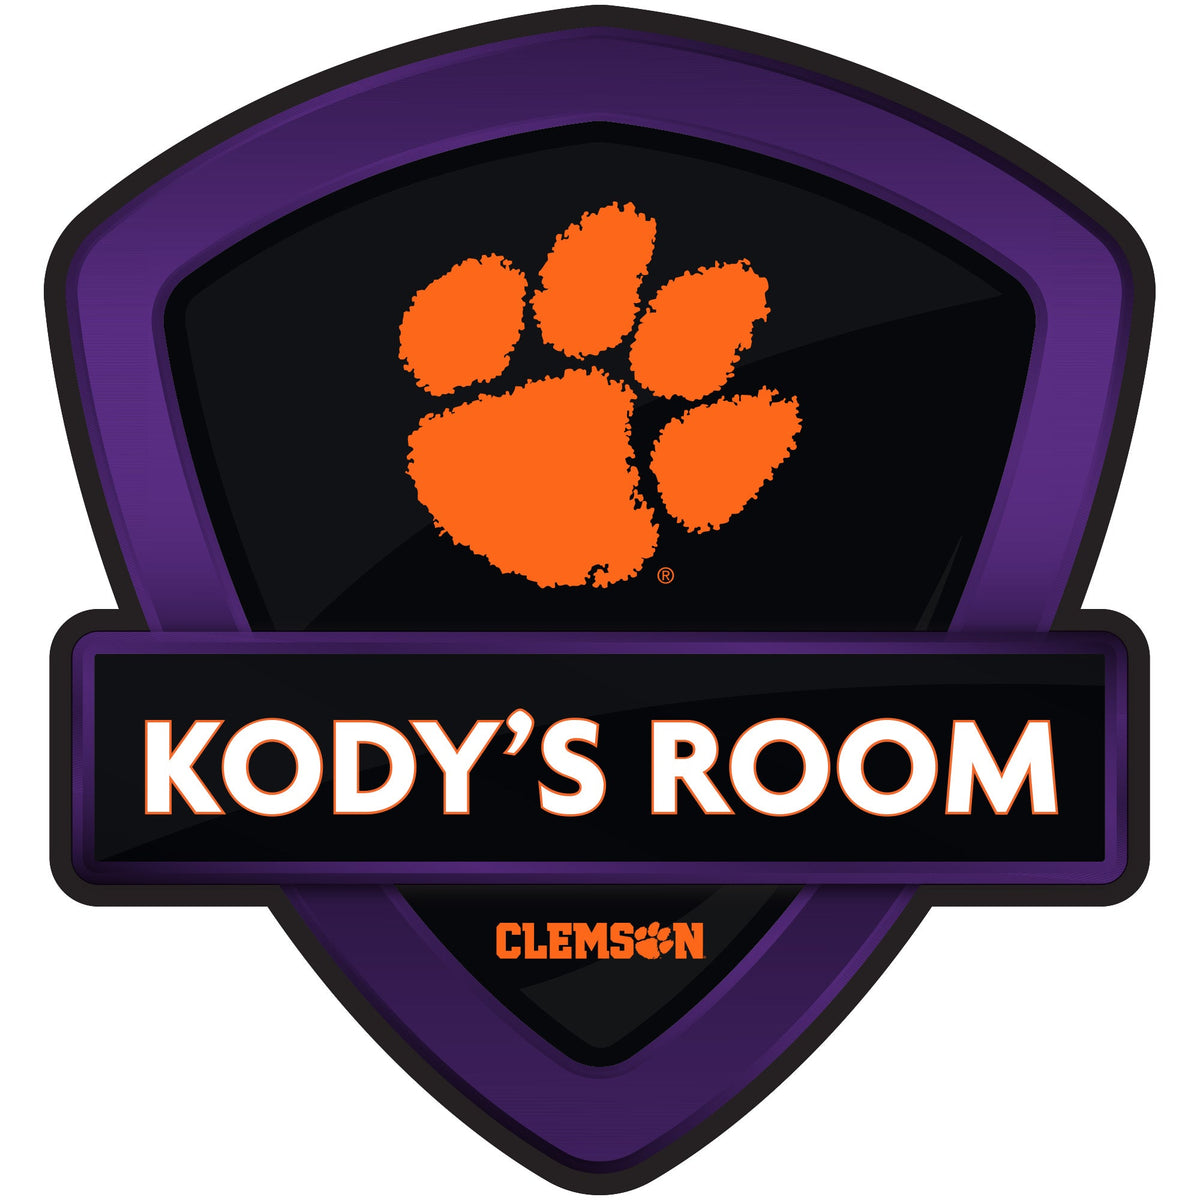 Clemson Tigers:   Badge Personalized Name        - Officially Licensed NCAA Removable     Adhesive Decal